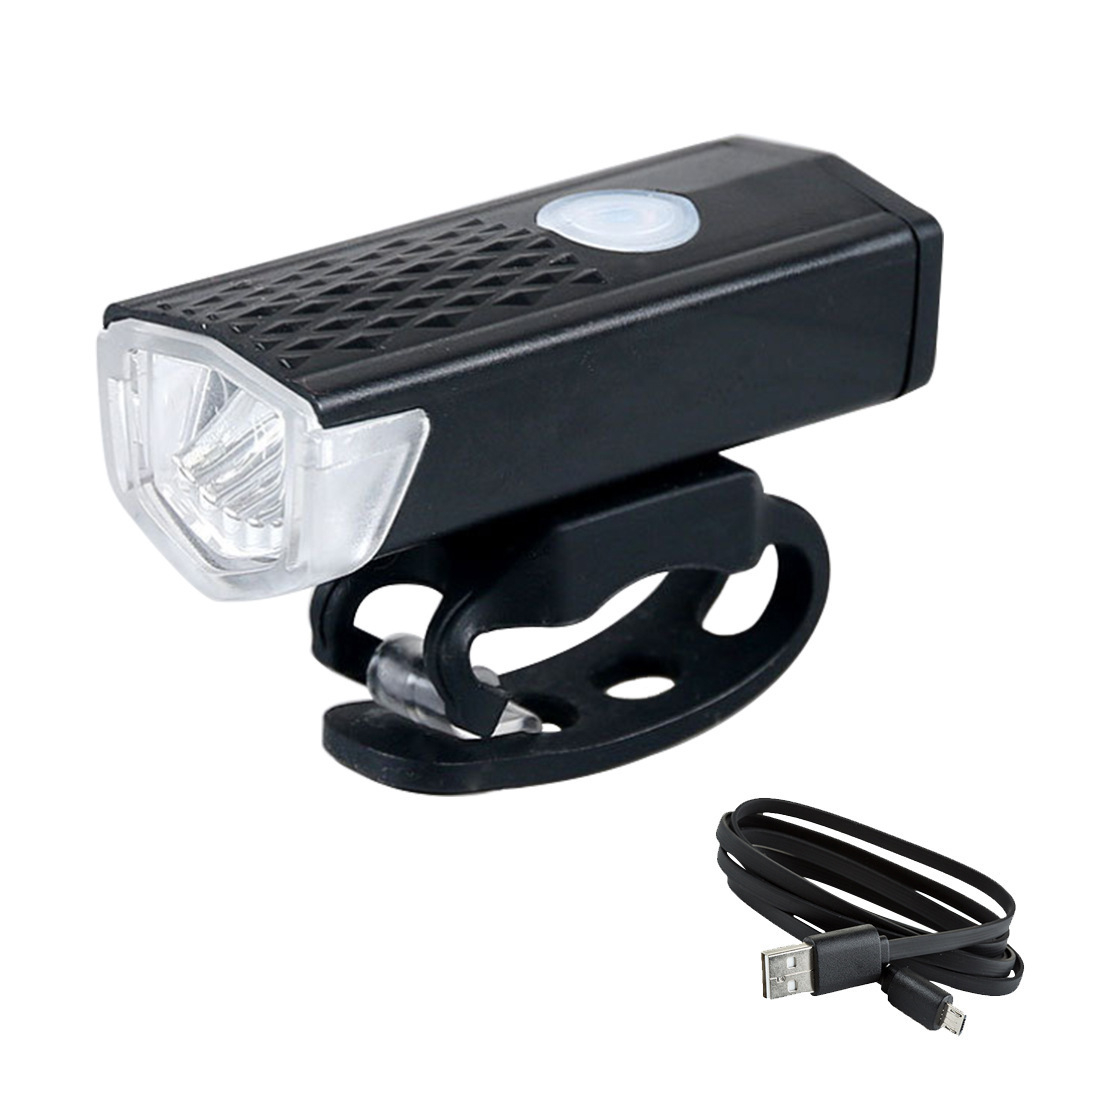 A10 Bicycle Light Front Rear Taillight USB Rechargeable LED MTB Mountain Bicycle Lamp Waterproof Bike Headlight Cycling Flashlight